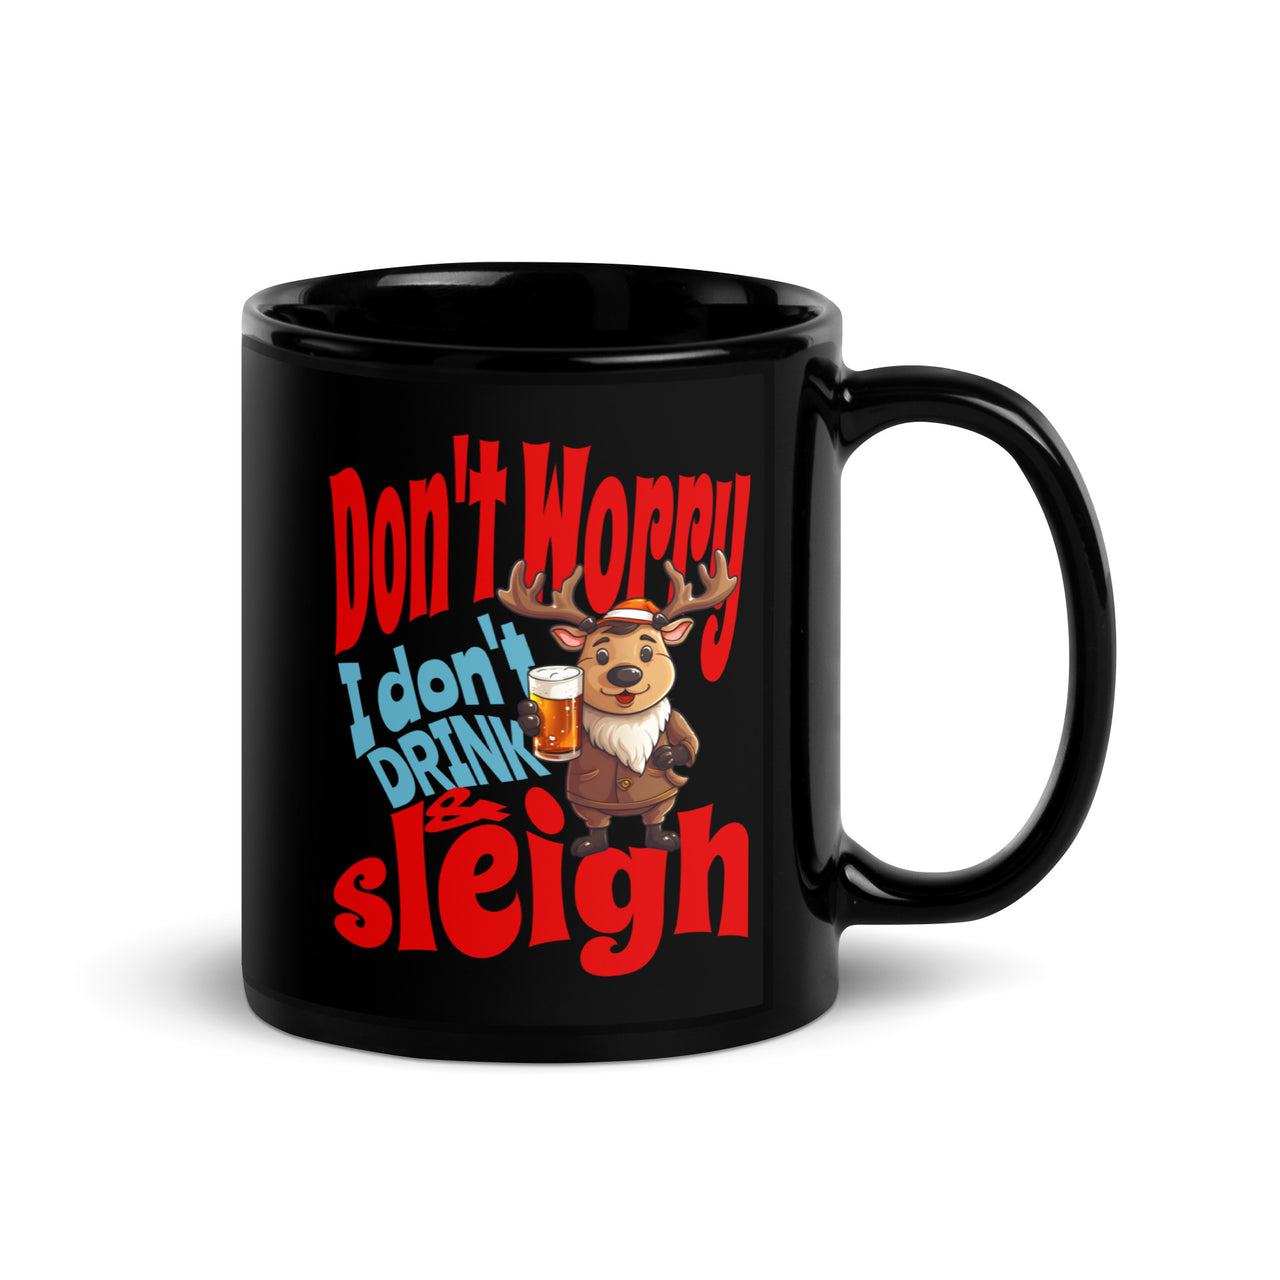 Don't Worry, I Don't Drink and Sleigh Black Mug